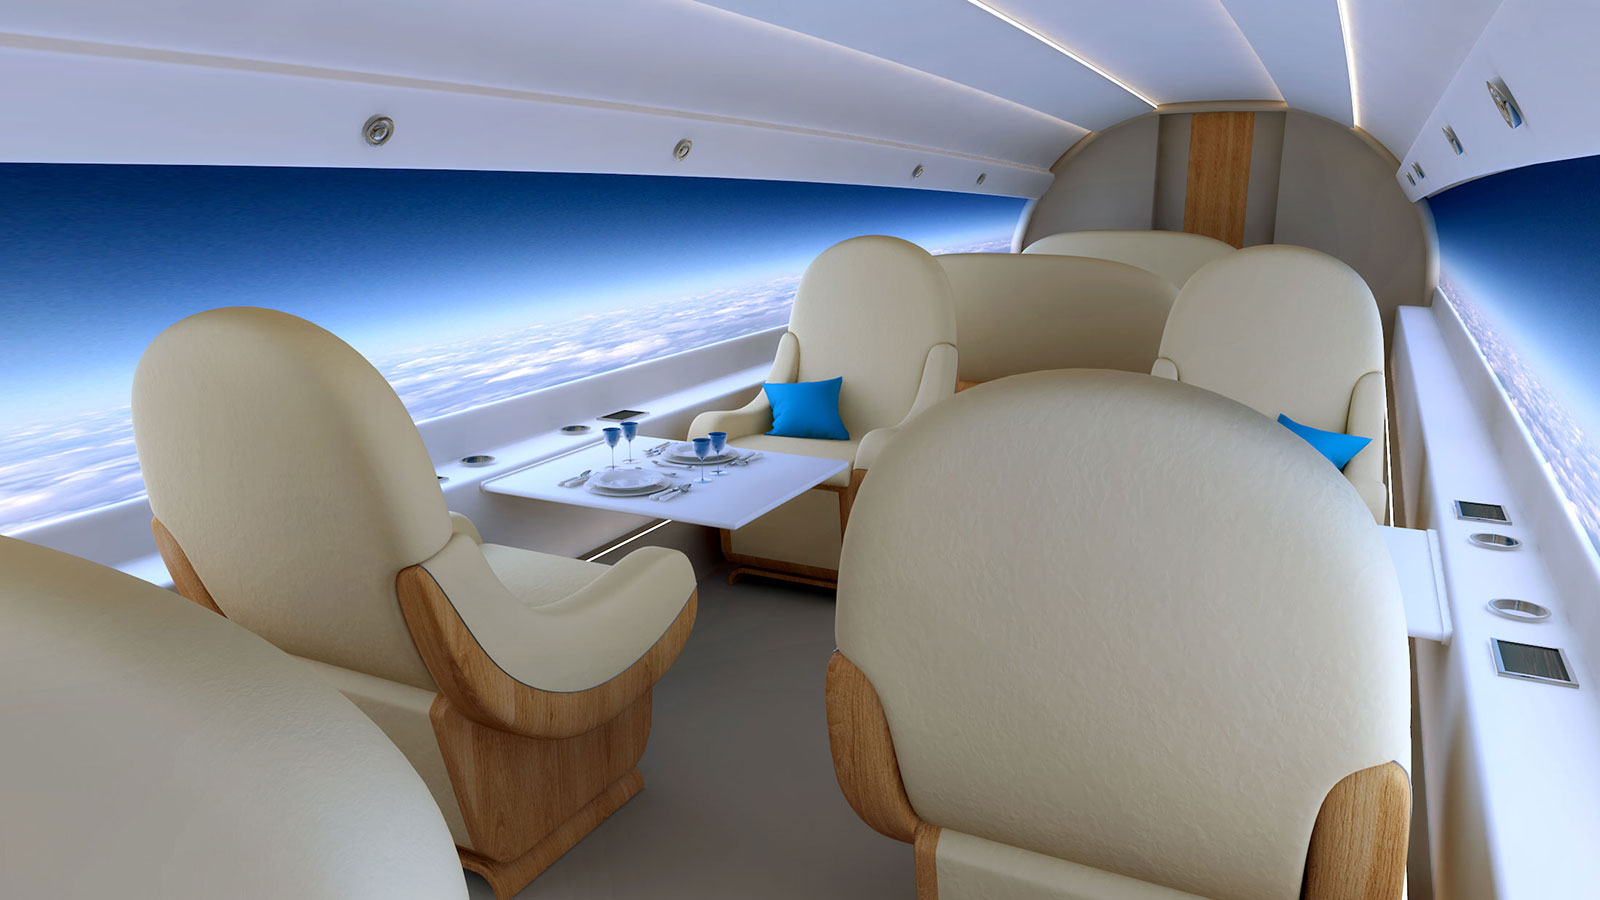 Supersonic private jet to use external cameras, giant displays instead of windows.